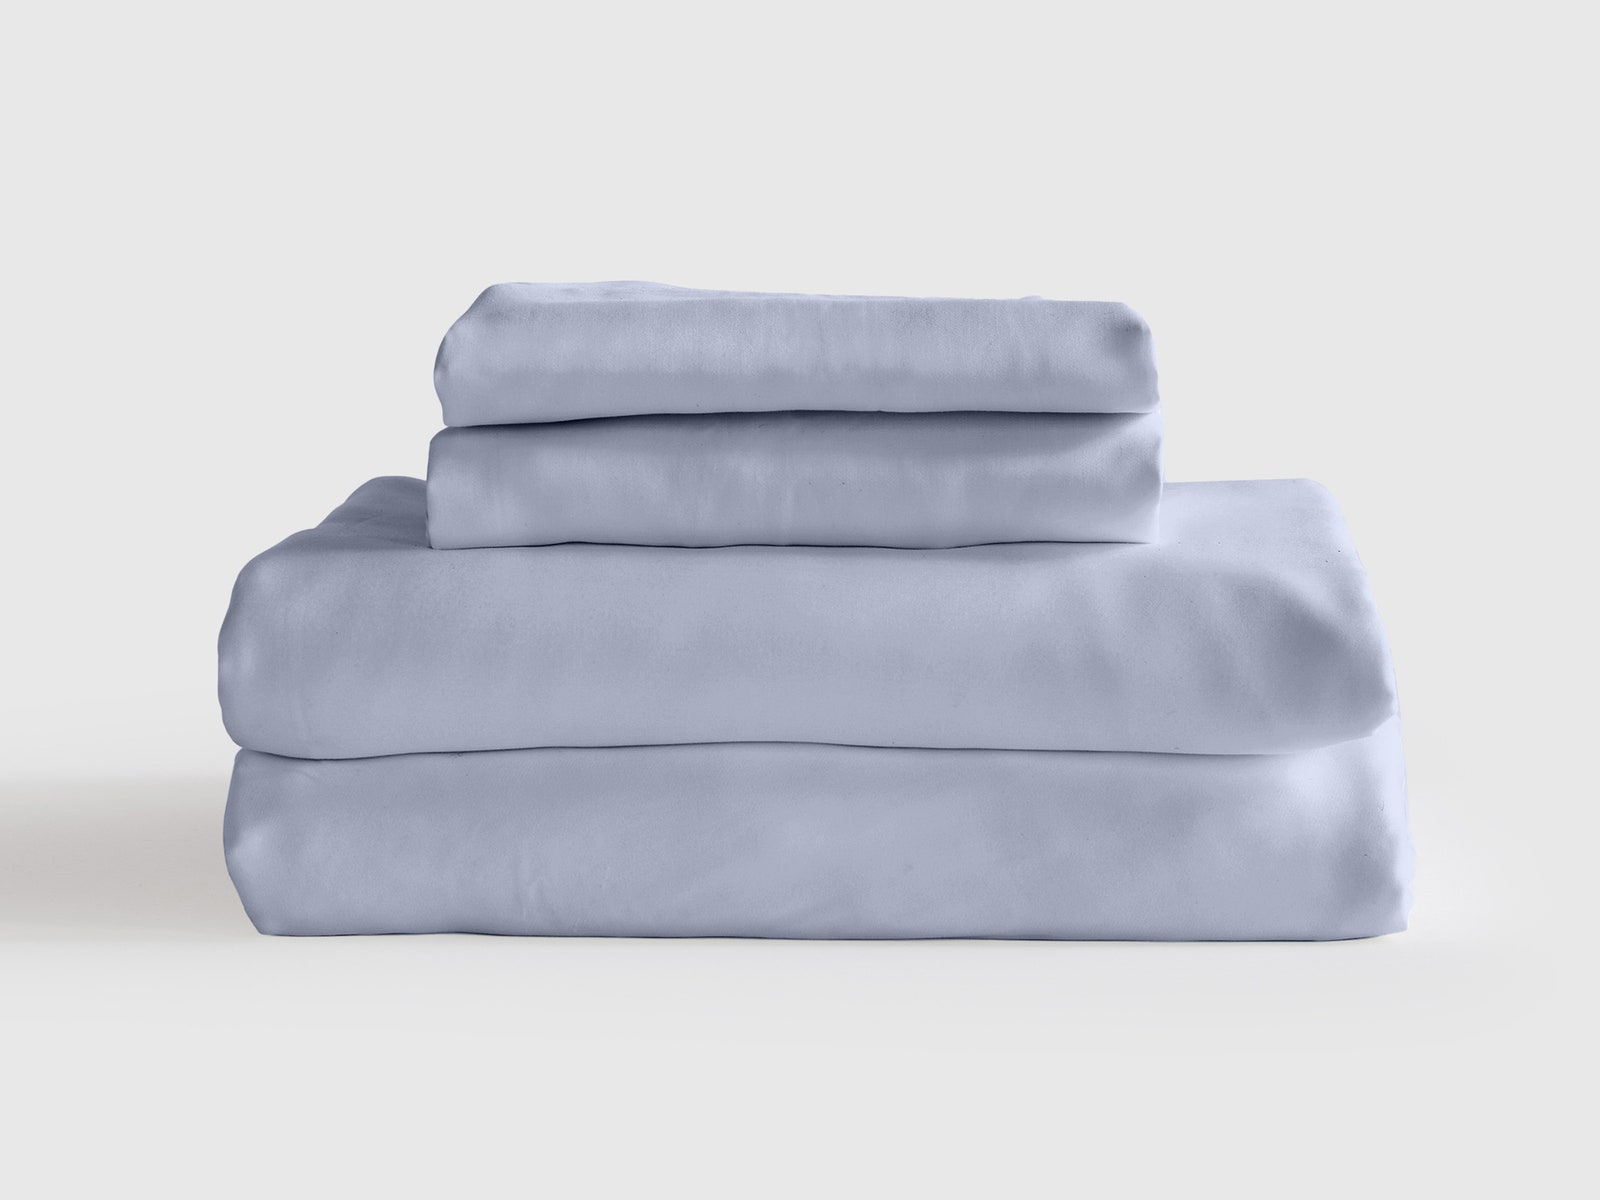 Pile of blue bamboo sheets and pillowcases.